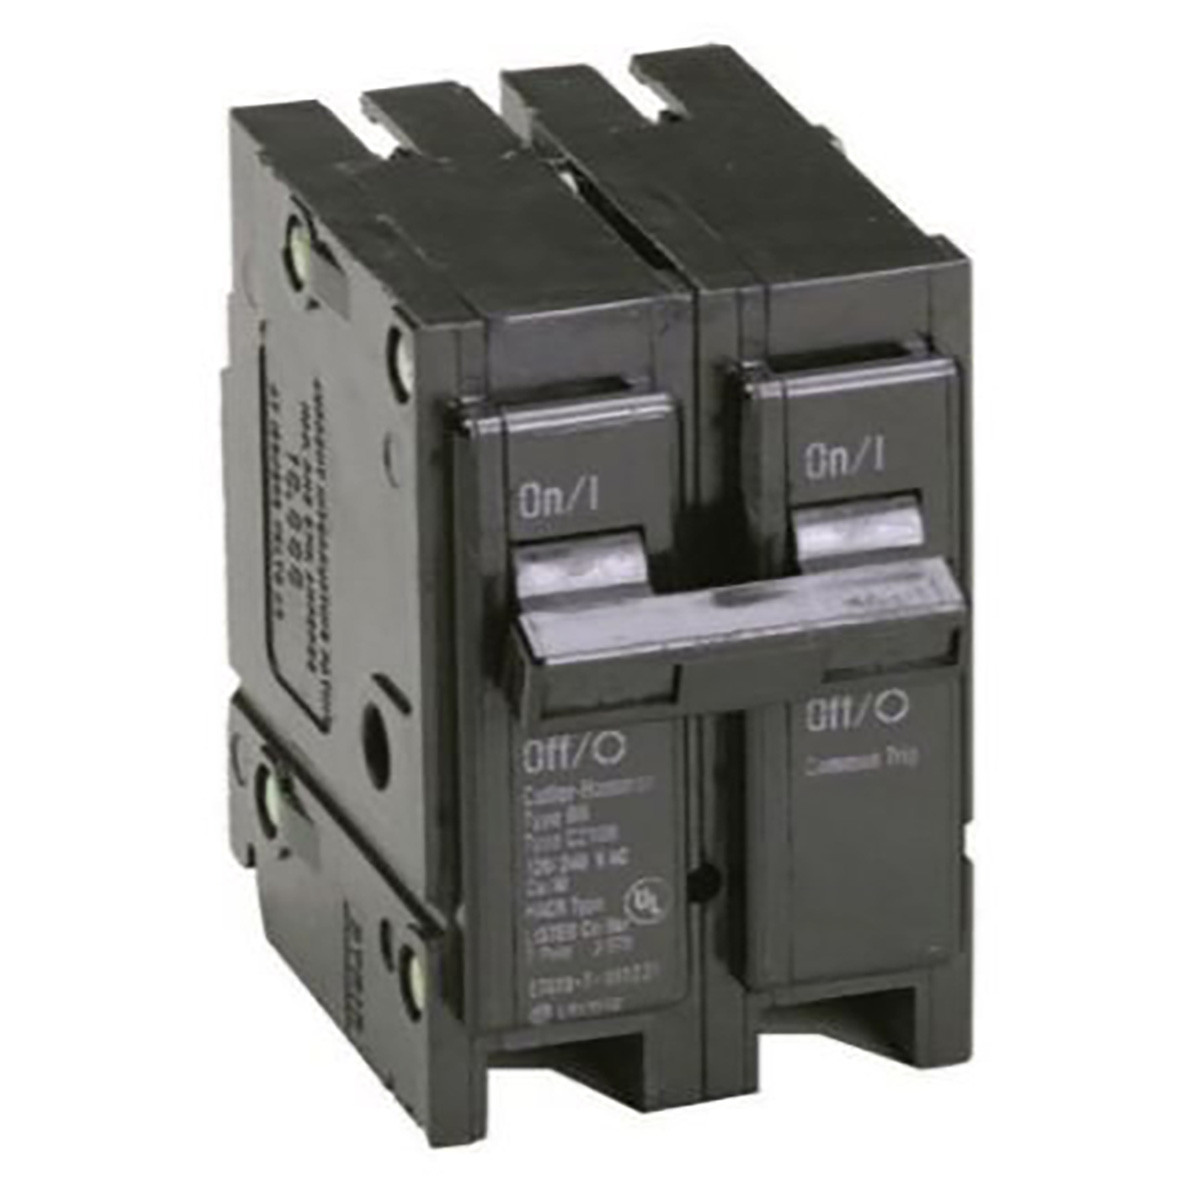 Eaton 2-Pole 20A 10kAIC Circuit Breaker for Enphase Enpower, a high-quality breaker designed to provide reliable protection and efficient performance for Enphase Enpower systems.